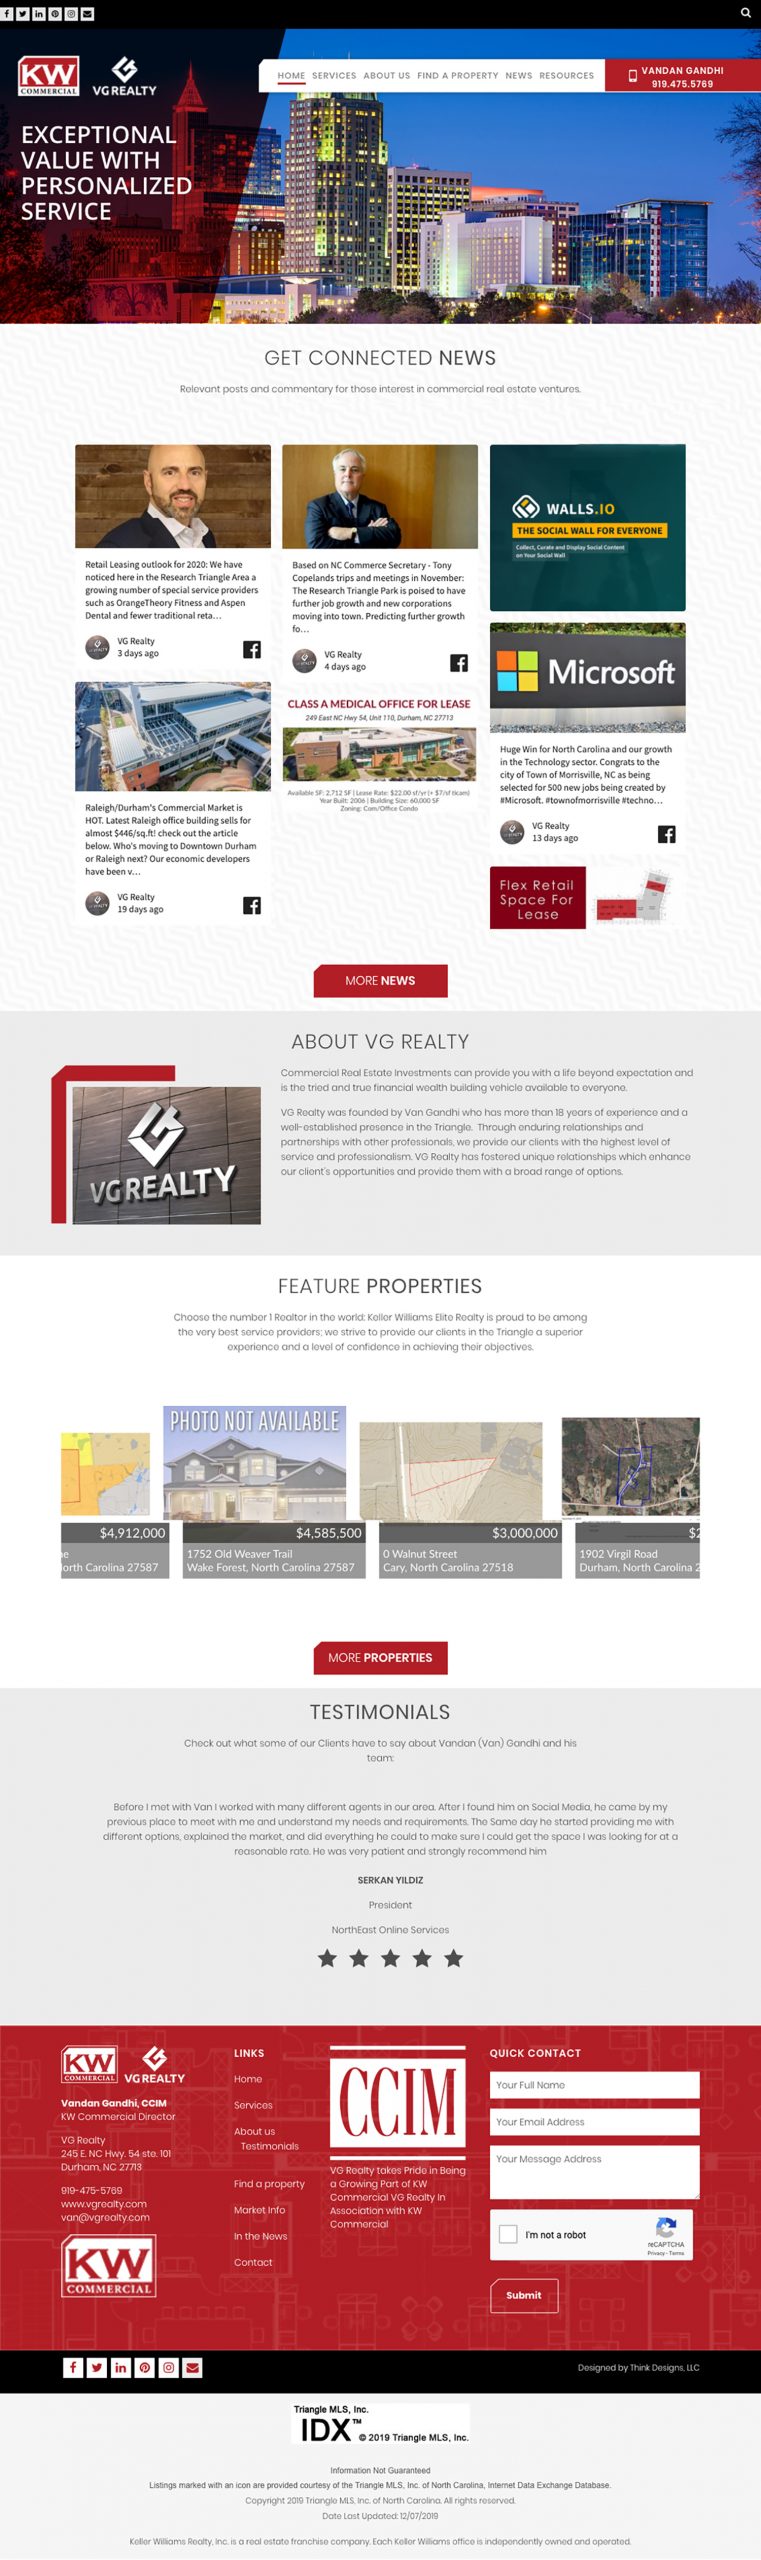 Web Design Commercial Real Estate Raleigh Nc Home